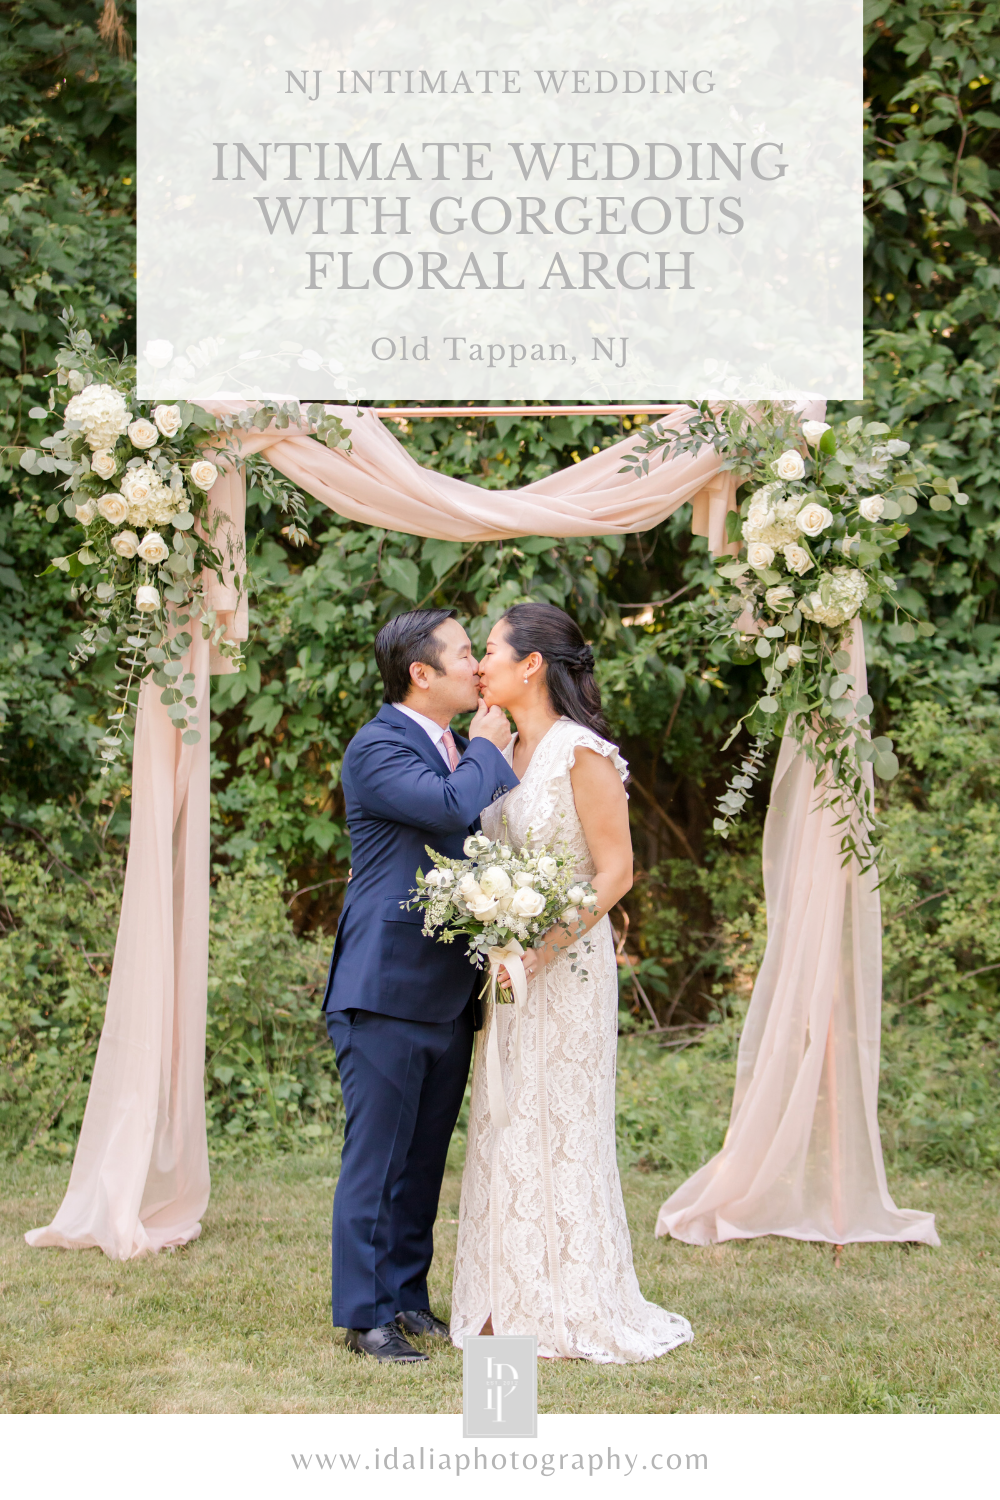 NJ Intimate Wedding with a Gorgeous Floral Arch by NJ Photographer Idalia Photography